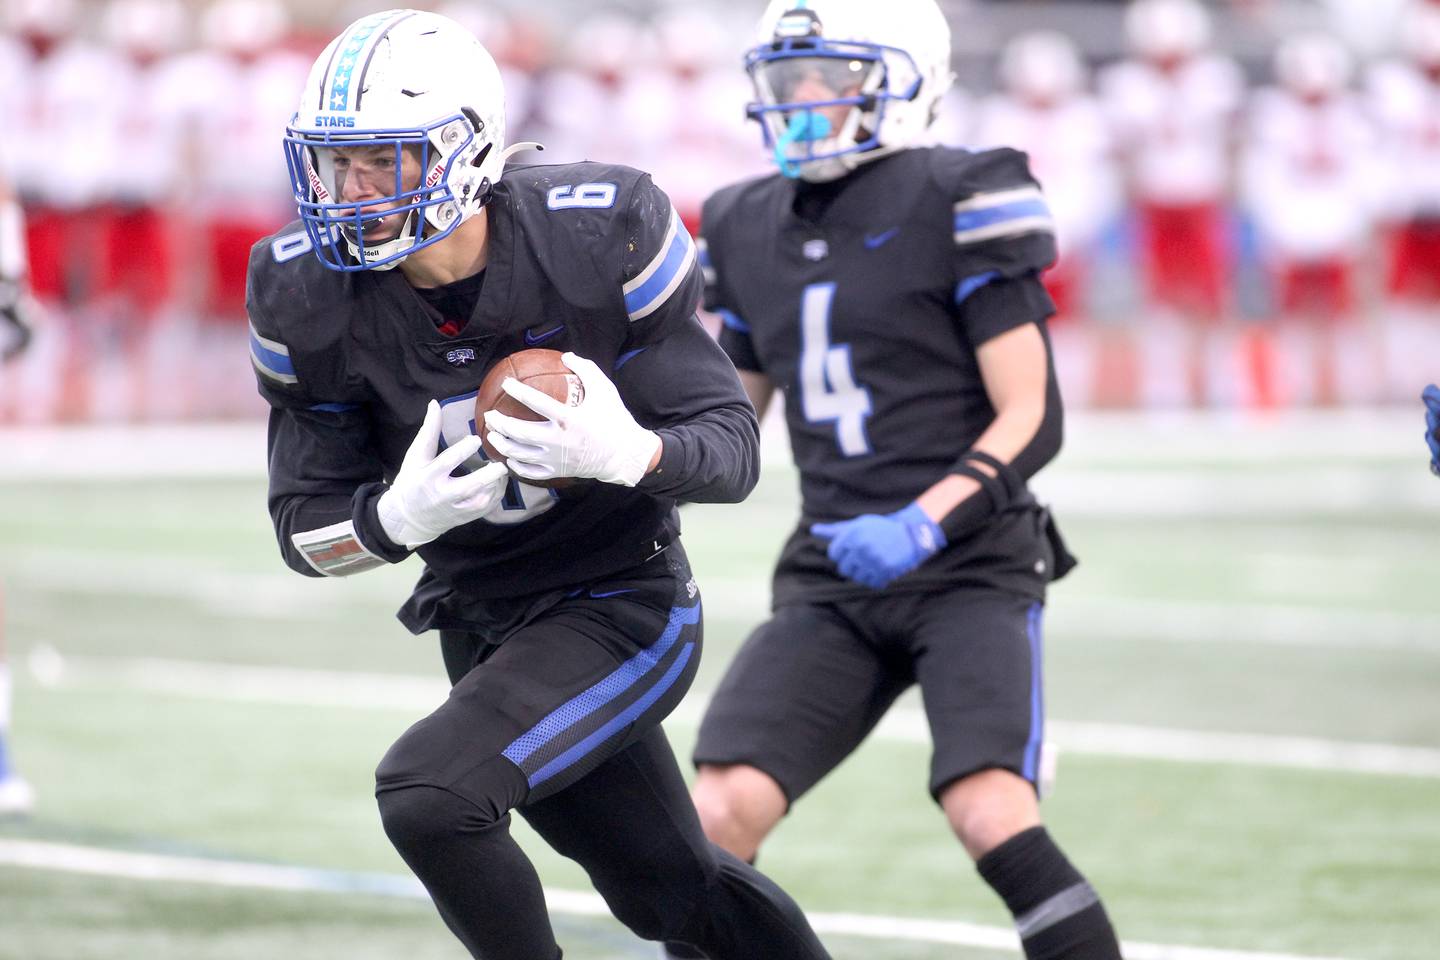 St. Charles North's Drew Surges (6) runs the ball in for a touchdown during their 7A quarterfinal game against St. Rita in St. Charles on Saturday, Nov. 12, 2022.